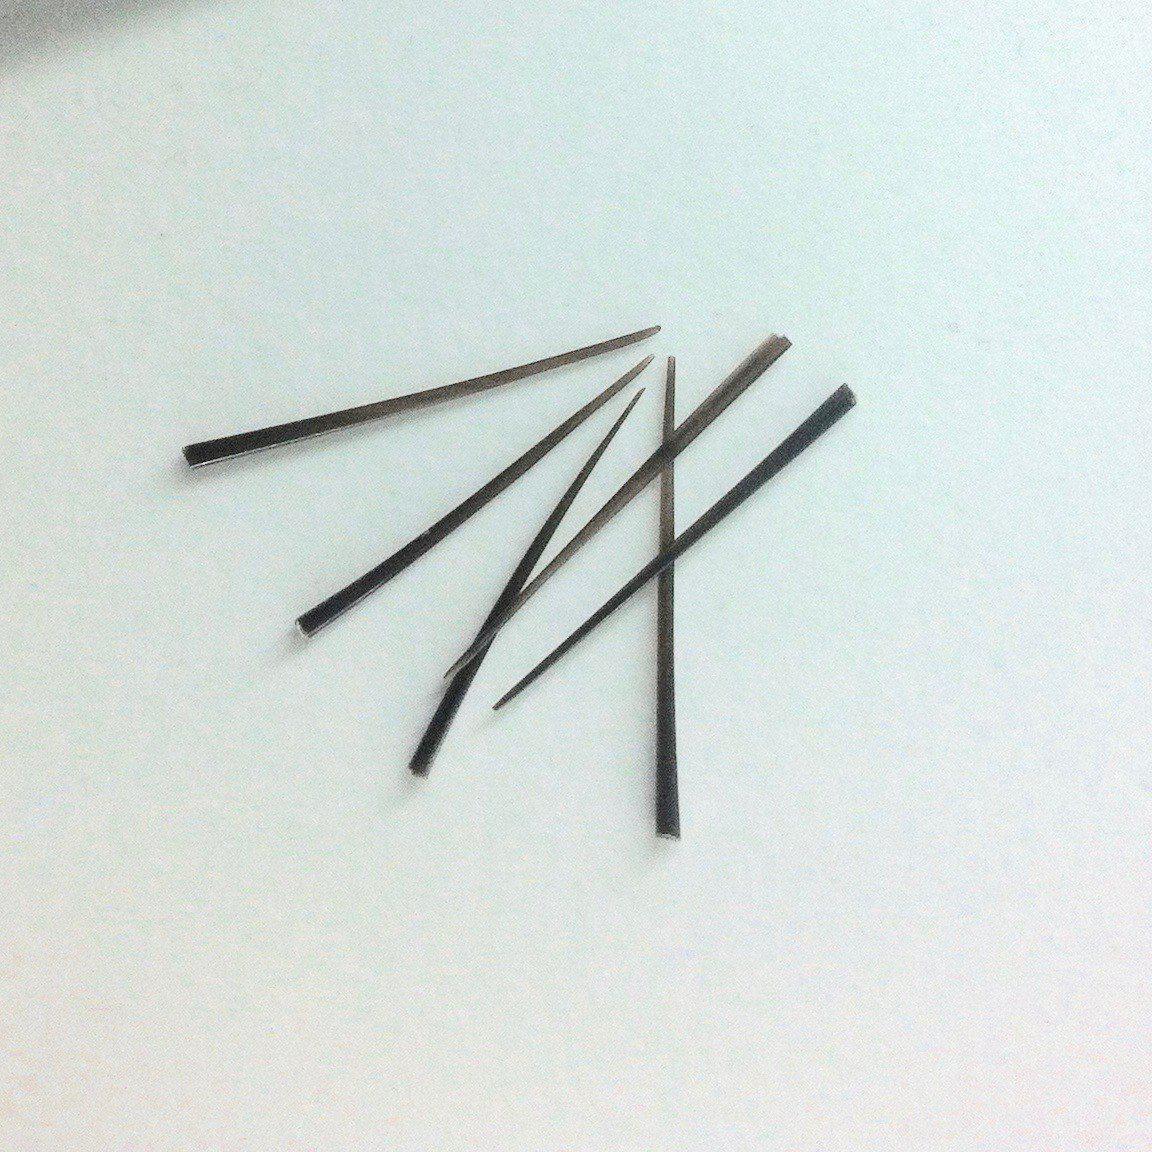 Extra posts and sticks for tribal earrings :|: Extra posts. Horn posts. extra sticks. | Posts extra sticks O-rings